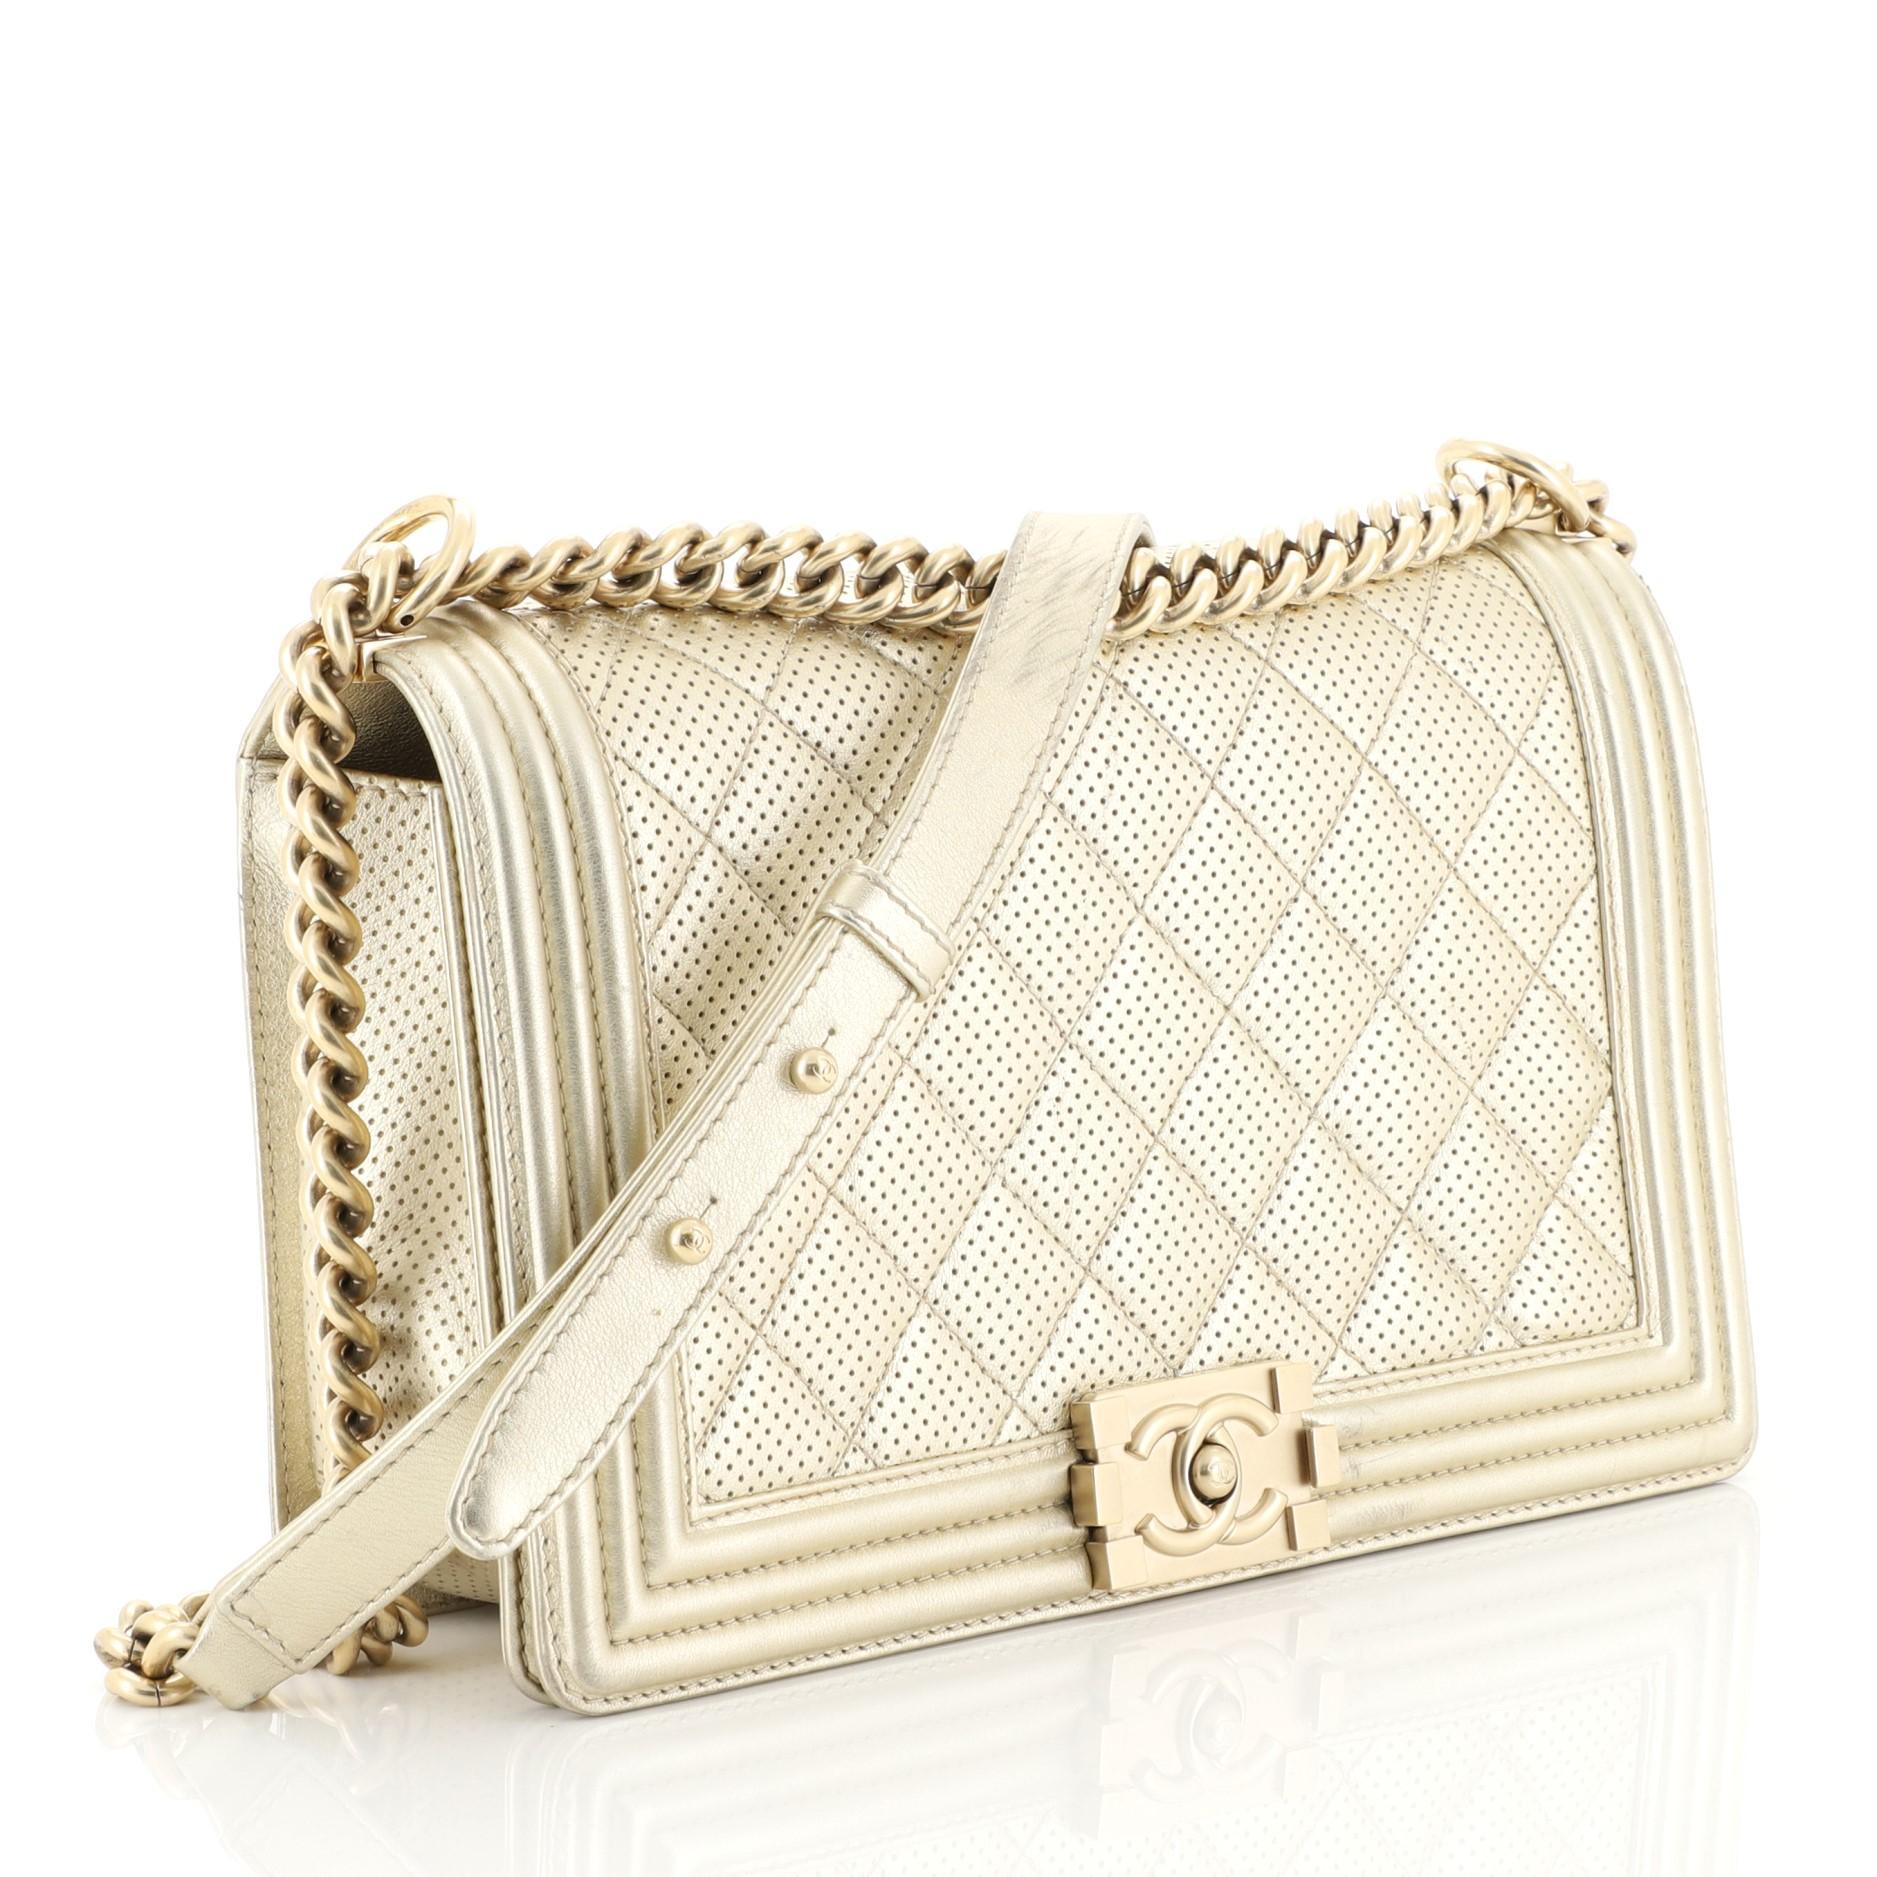 This Chanel Boy Flap Bag Quilted Perforated Lambskin New Medium, crafted from metallic gold perforated quilted lambskin leather, features chain link strap with leather shoulder pad and matte gold-tone hardware. Its CC boy push-lock closure opens to